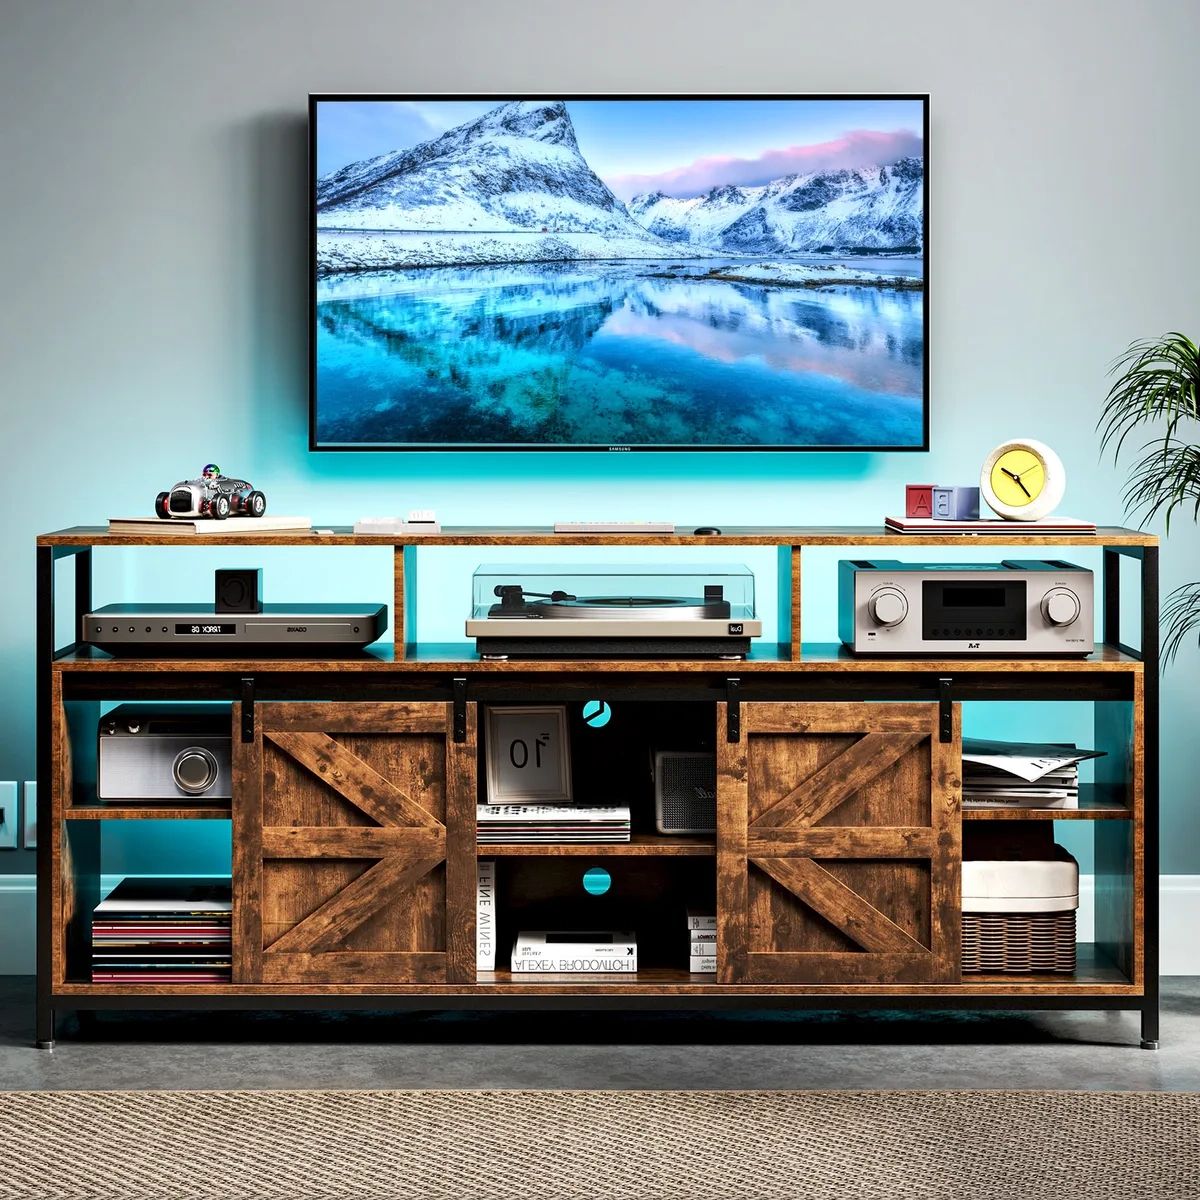 Tc Homeny Tv Stand With Power Station + Rgb Led Tv Cabinet Entertainment  Center | Ebay Throughout Rgb Tv Entertainment Centers (Gallery 16 of 20)